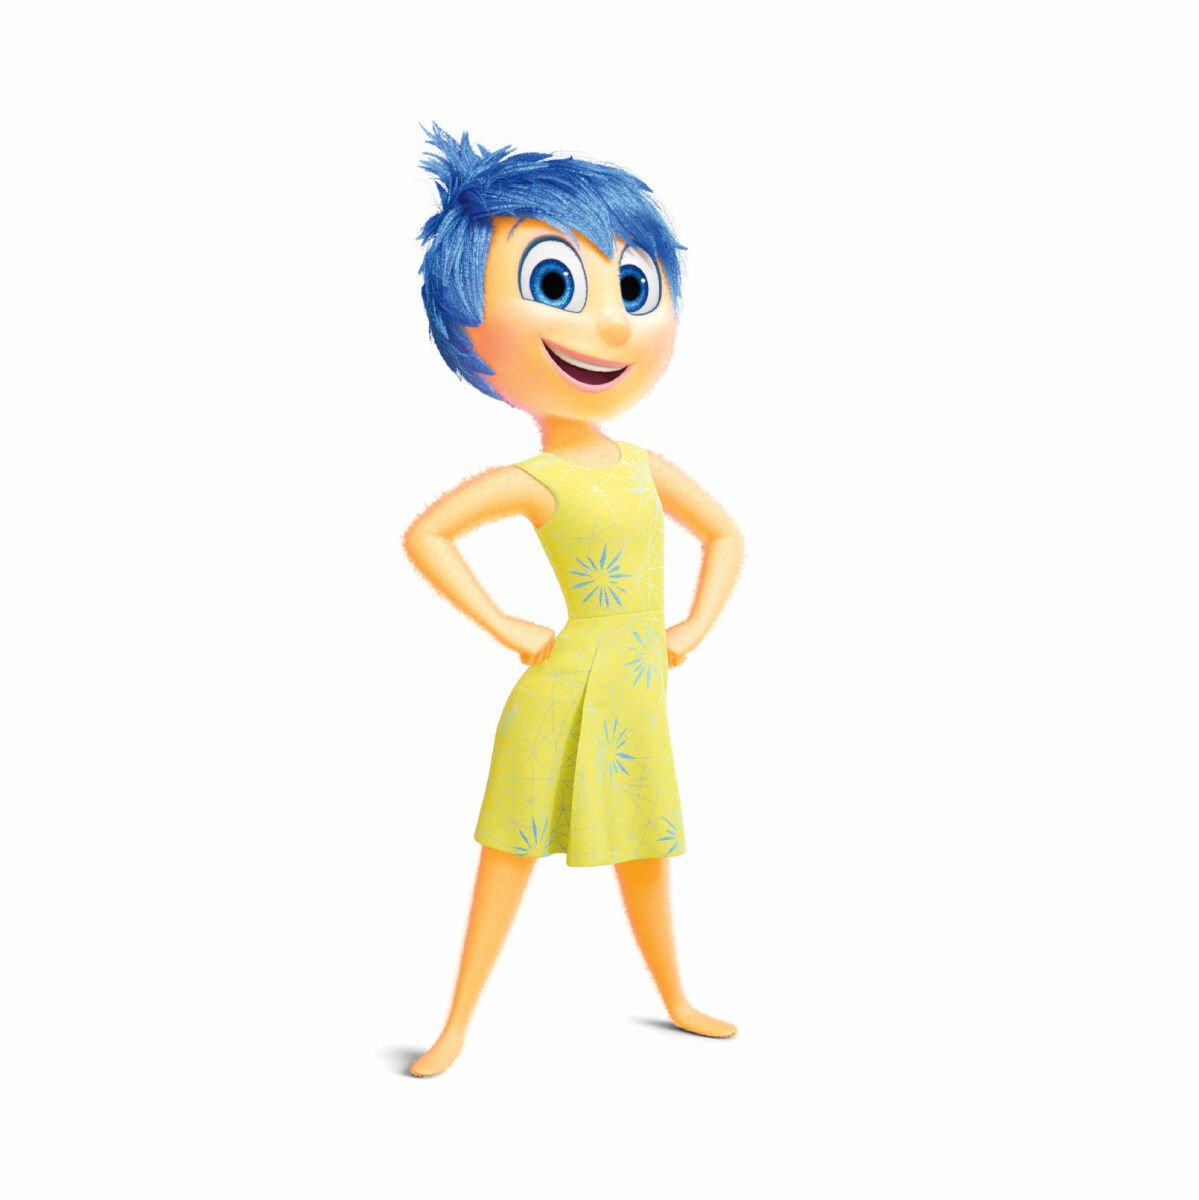 Going through the emotions — did Inside Out get it right?